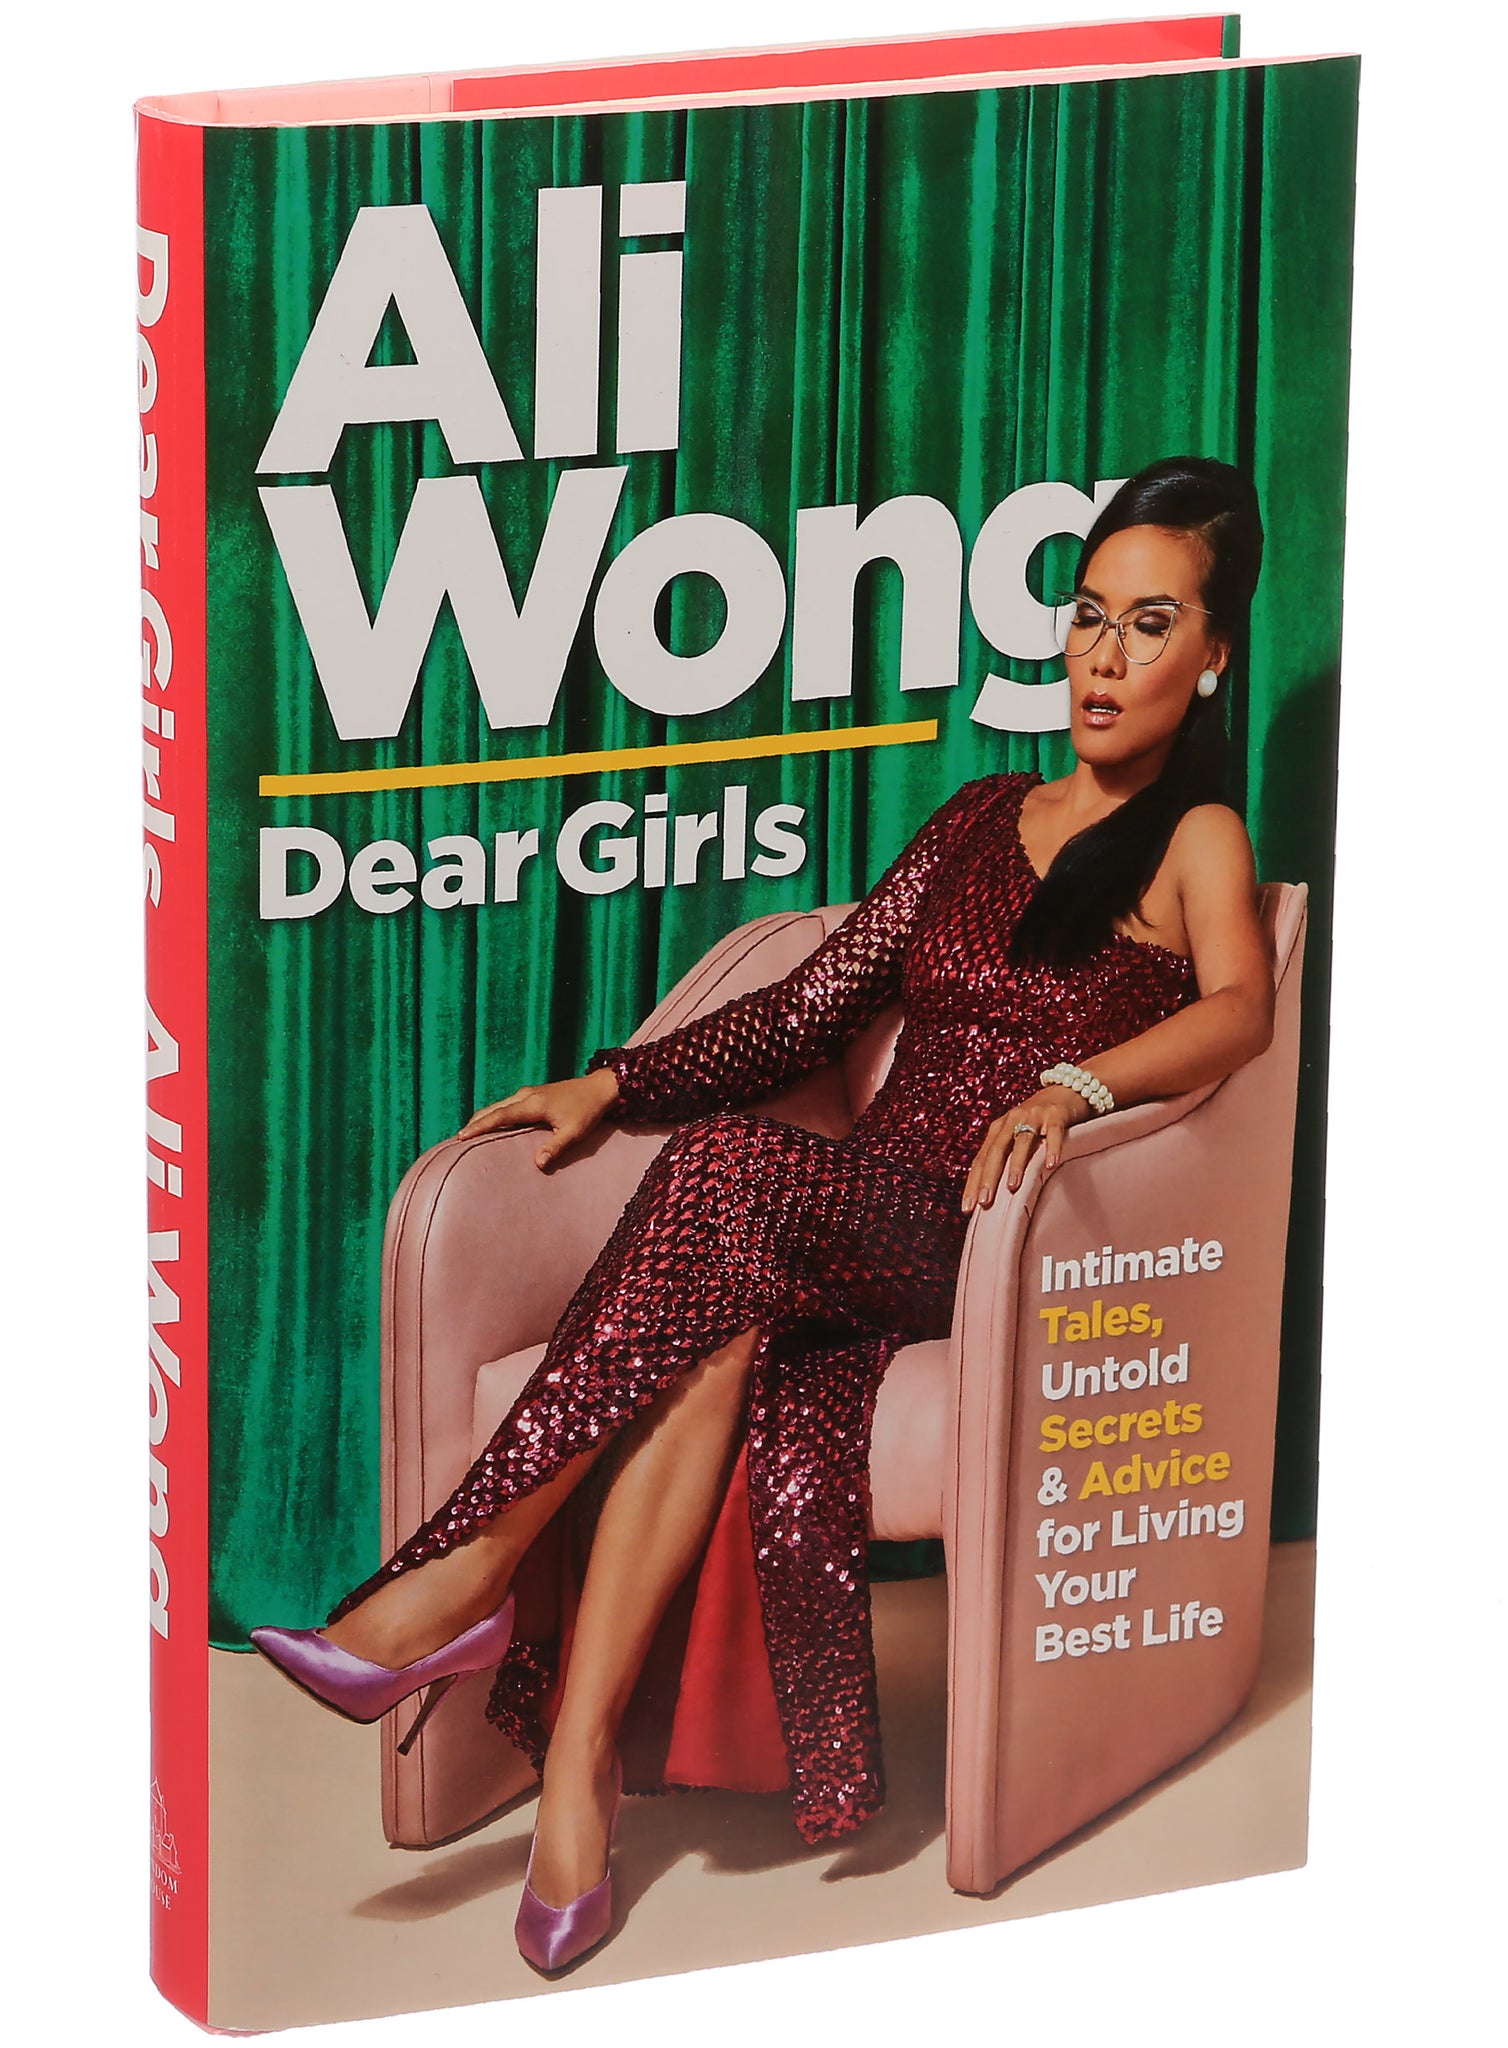 Dear Girls: Intimate Tales, Untold Secrets, & Advice for Living Your Best Life